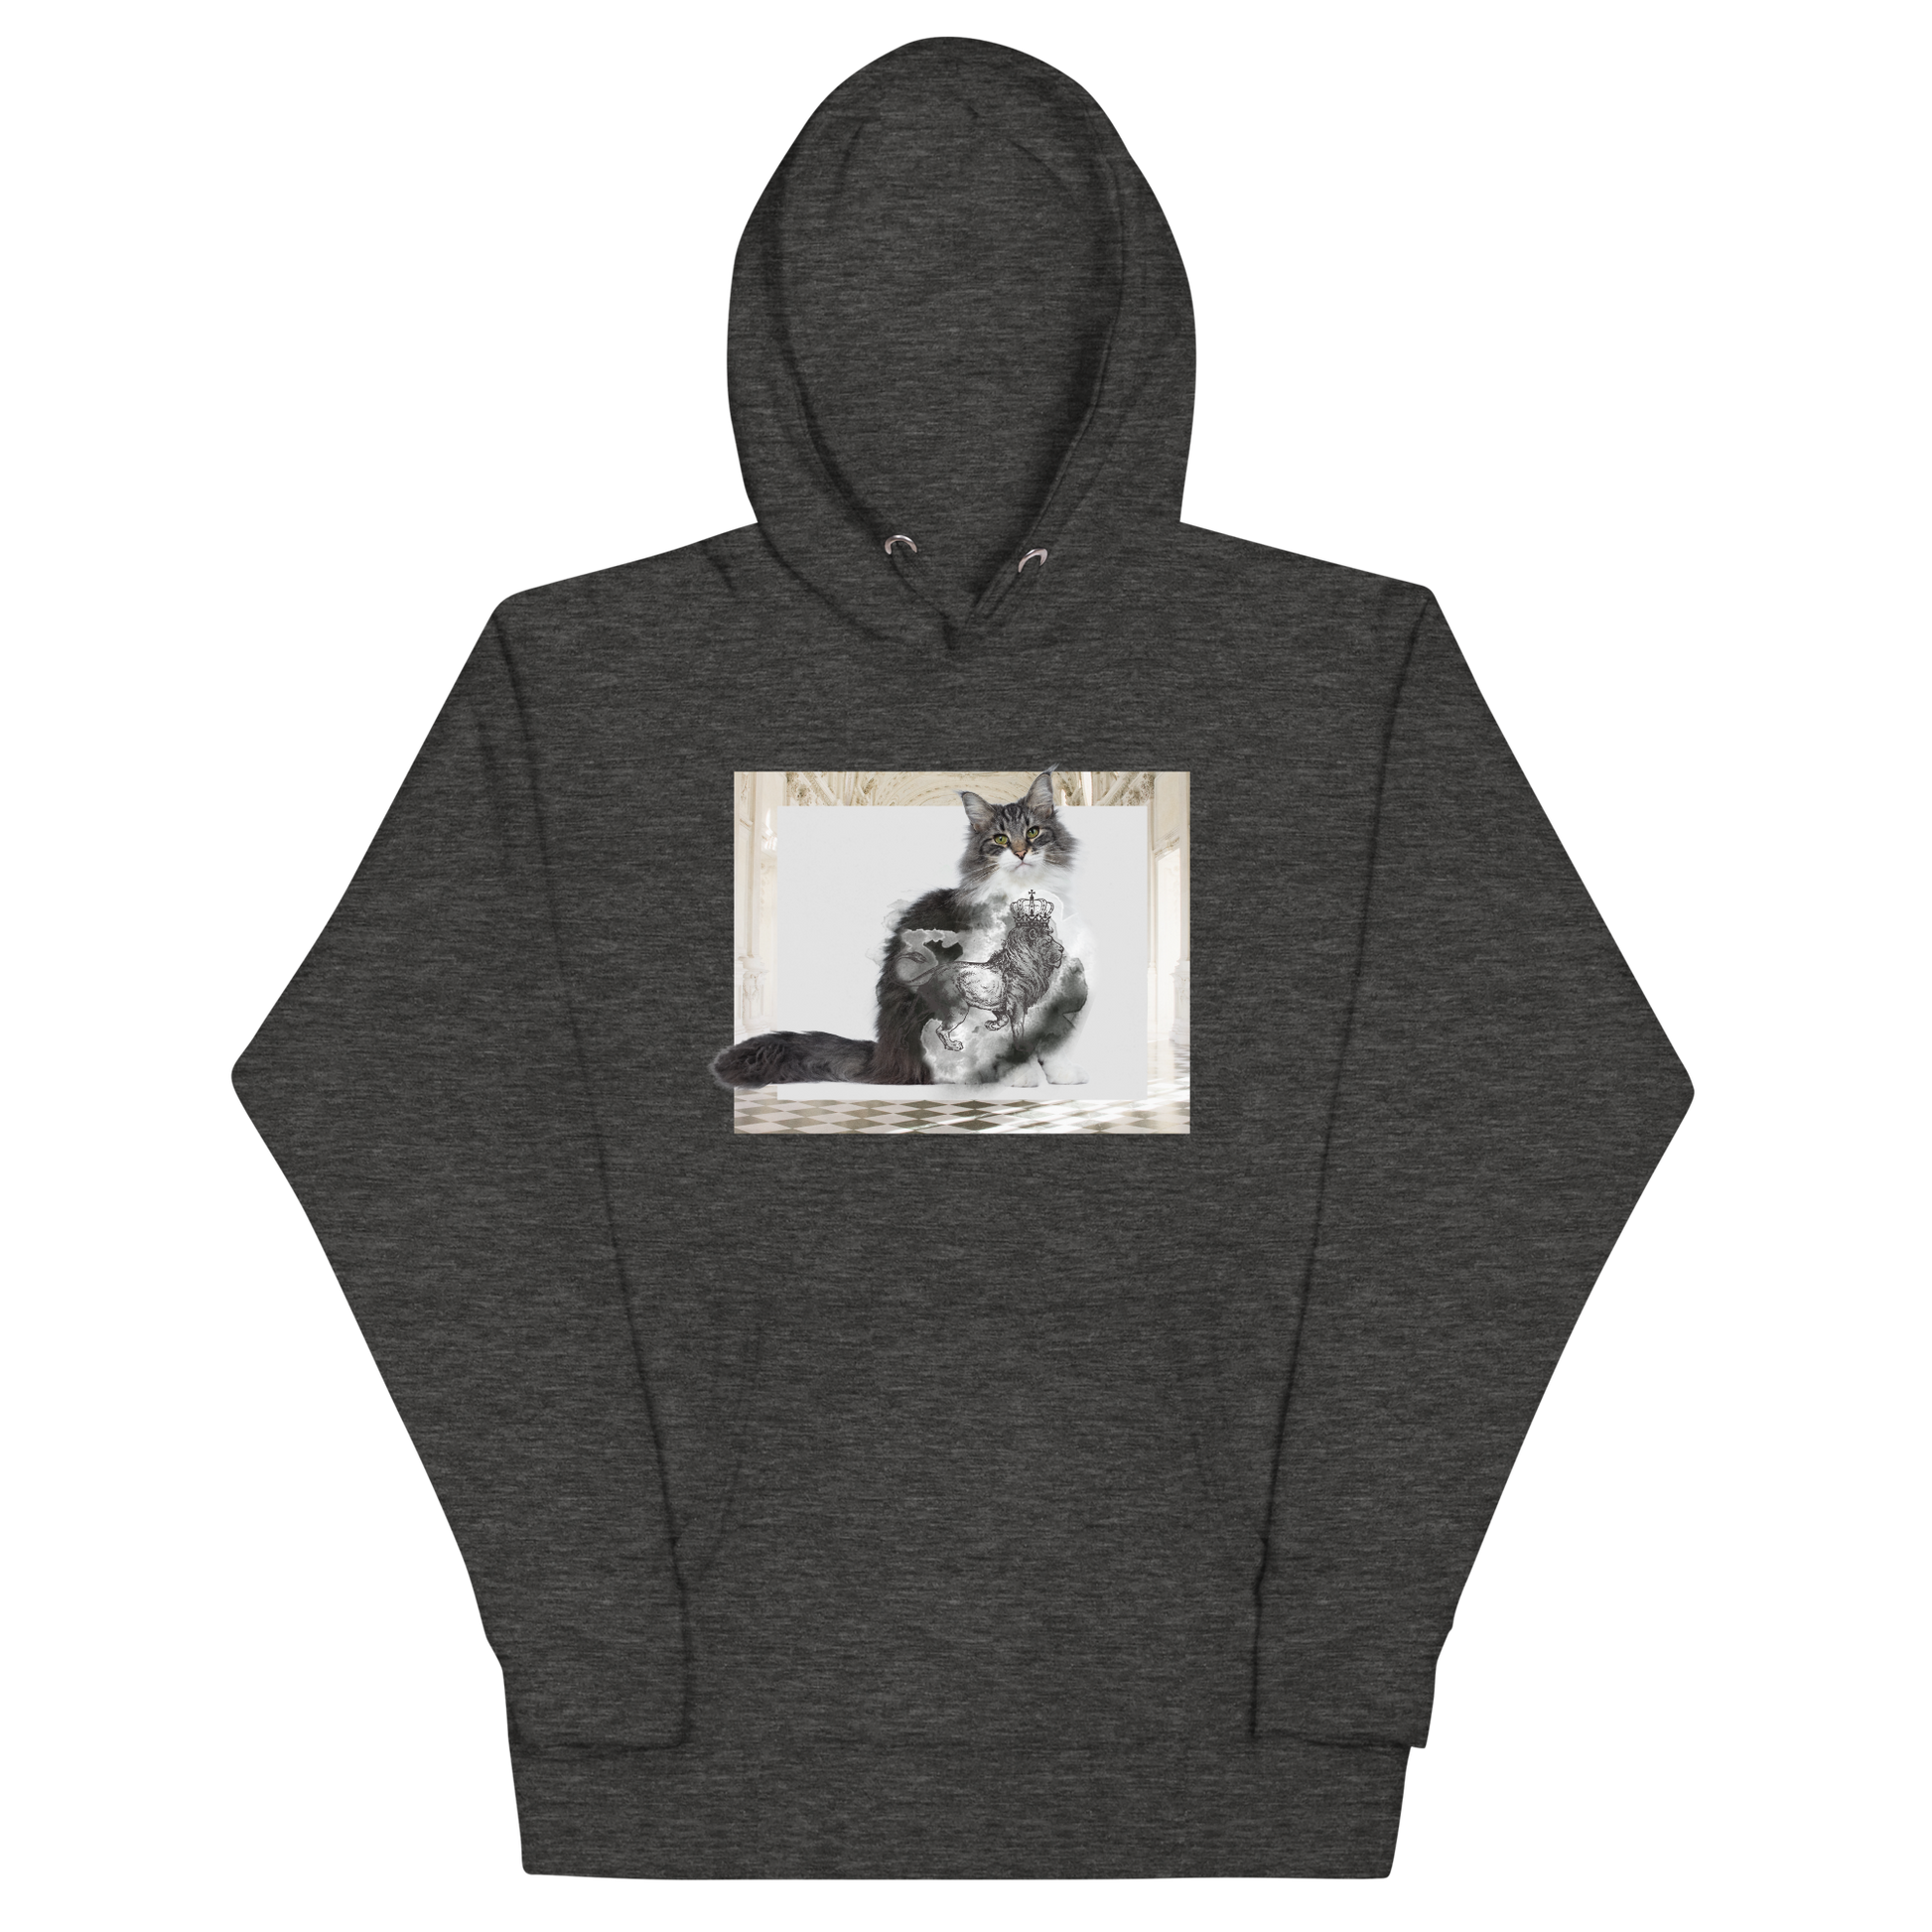 Charcoal Heather Premium Cat Hoodie featuring a majestic Royal Cat graphic on the chest - Cool Graphic Cat Hoodies - Boozy Fox